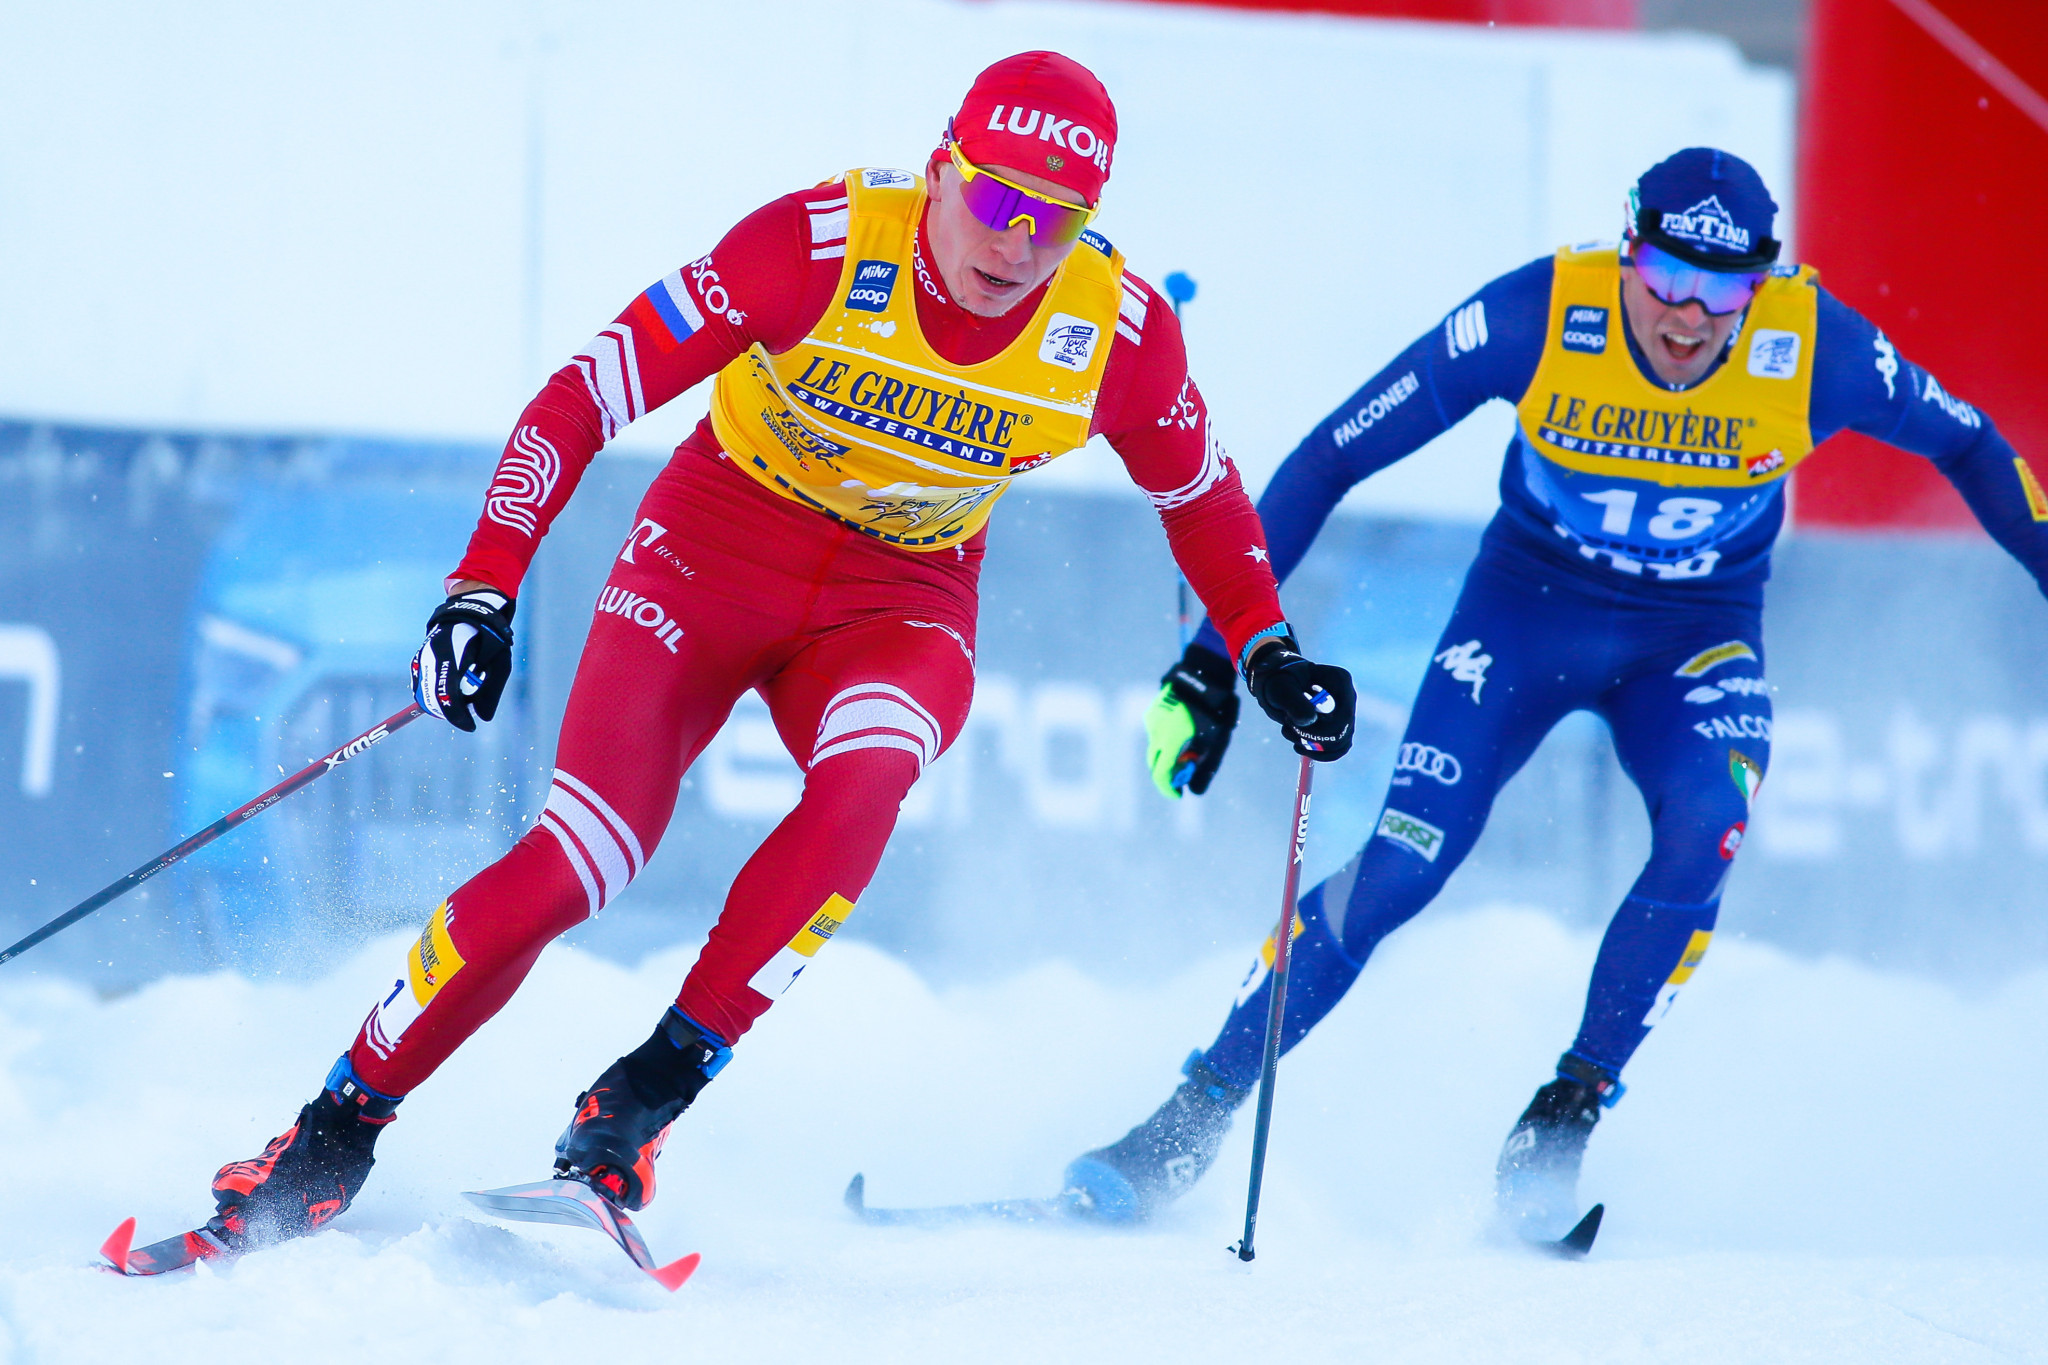 Alexander Bolshunov continued his red hot form in Val di Fiemme ©Getty Images